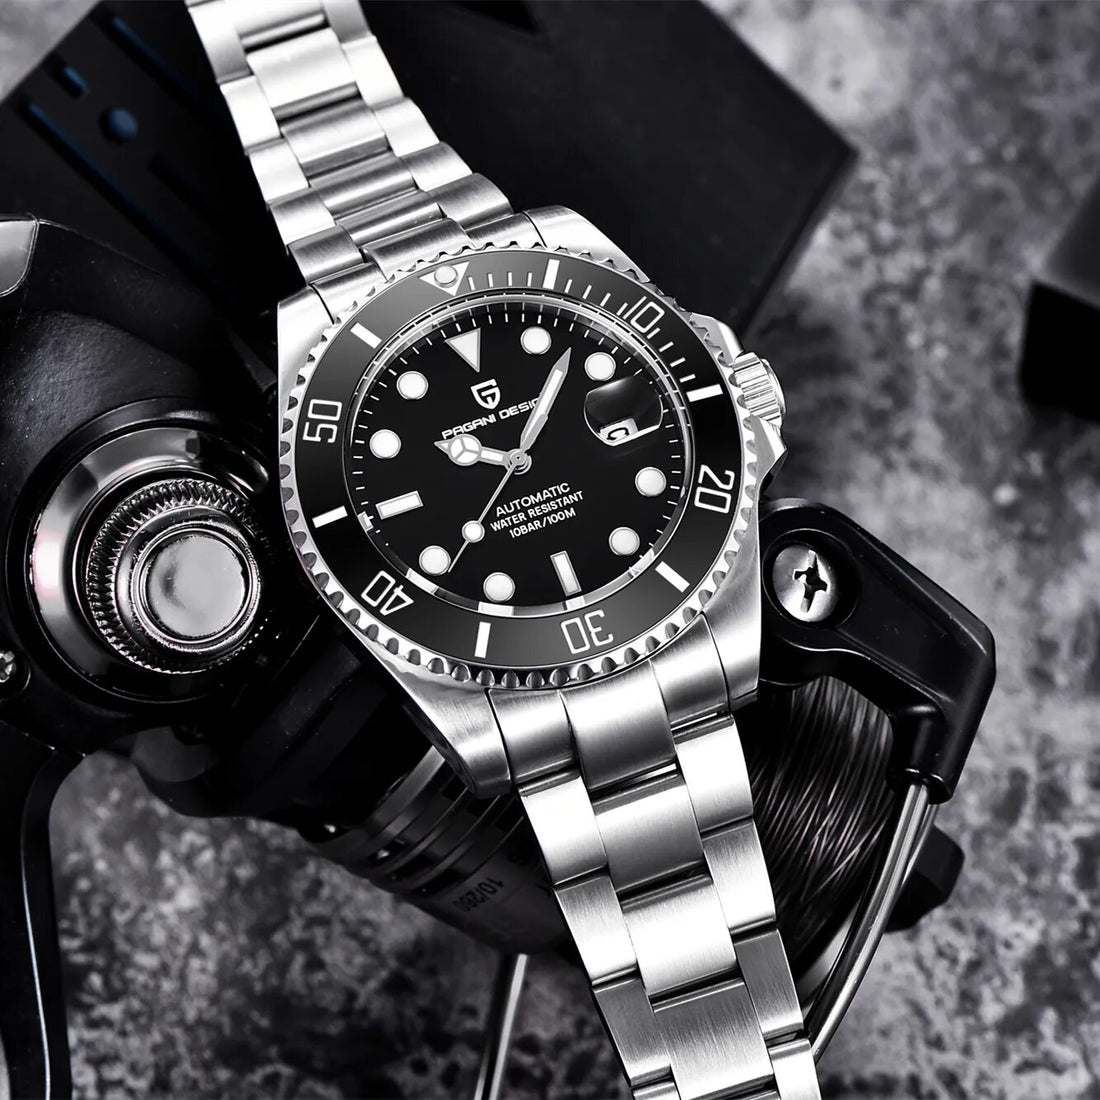 The Rolex Submariner Homage - Why the Pagani Design PD-1639 Is the Perfect Alternative